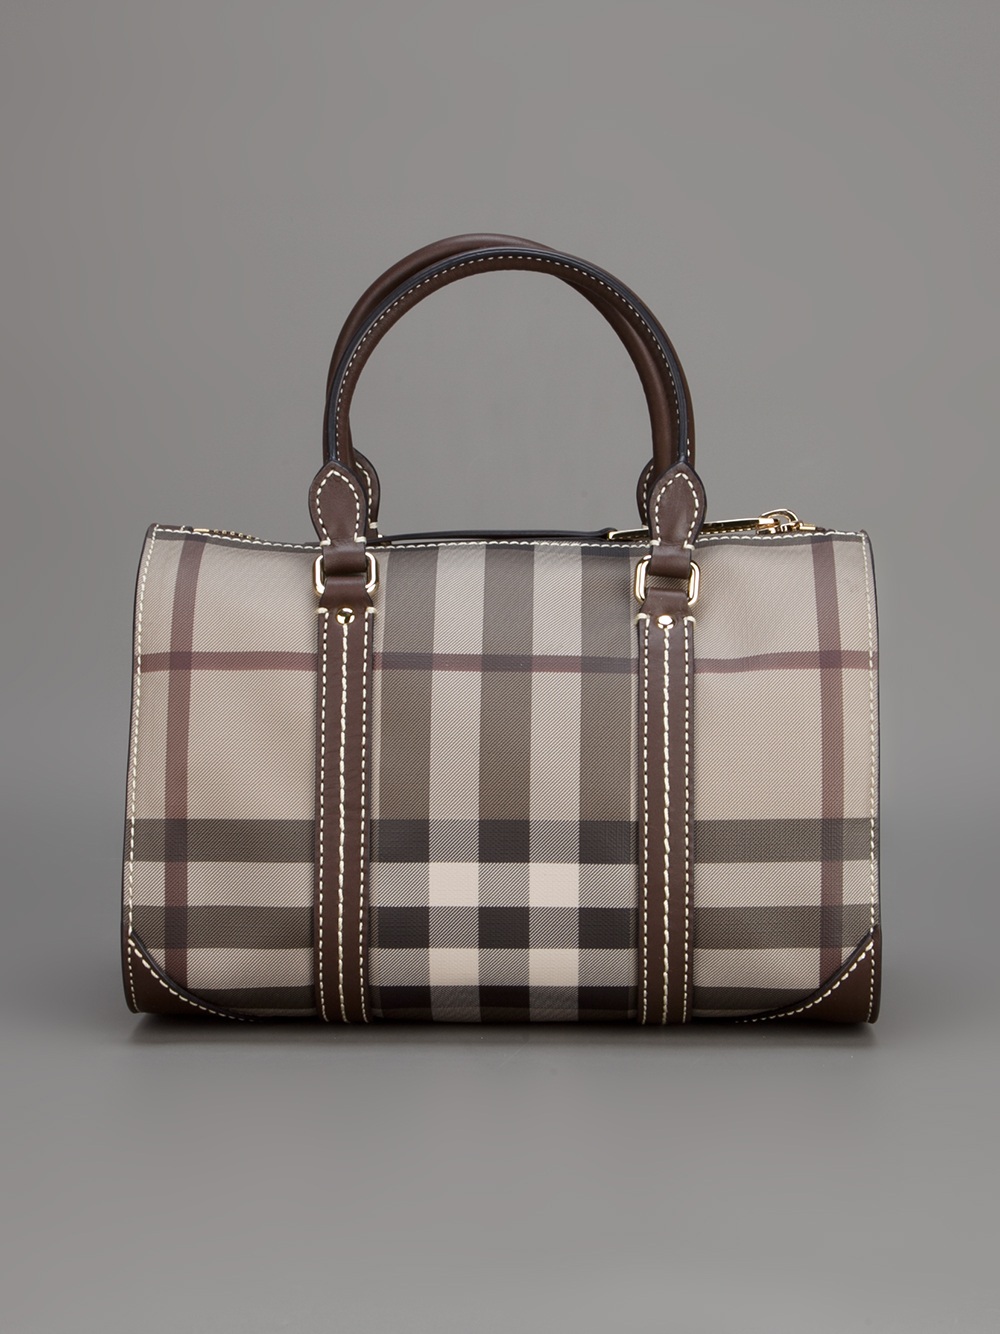 Lyst - Burberry Check Bowling Bag in Gray